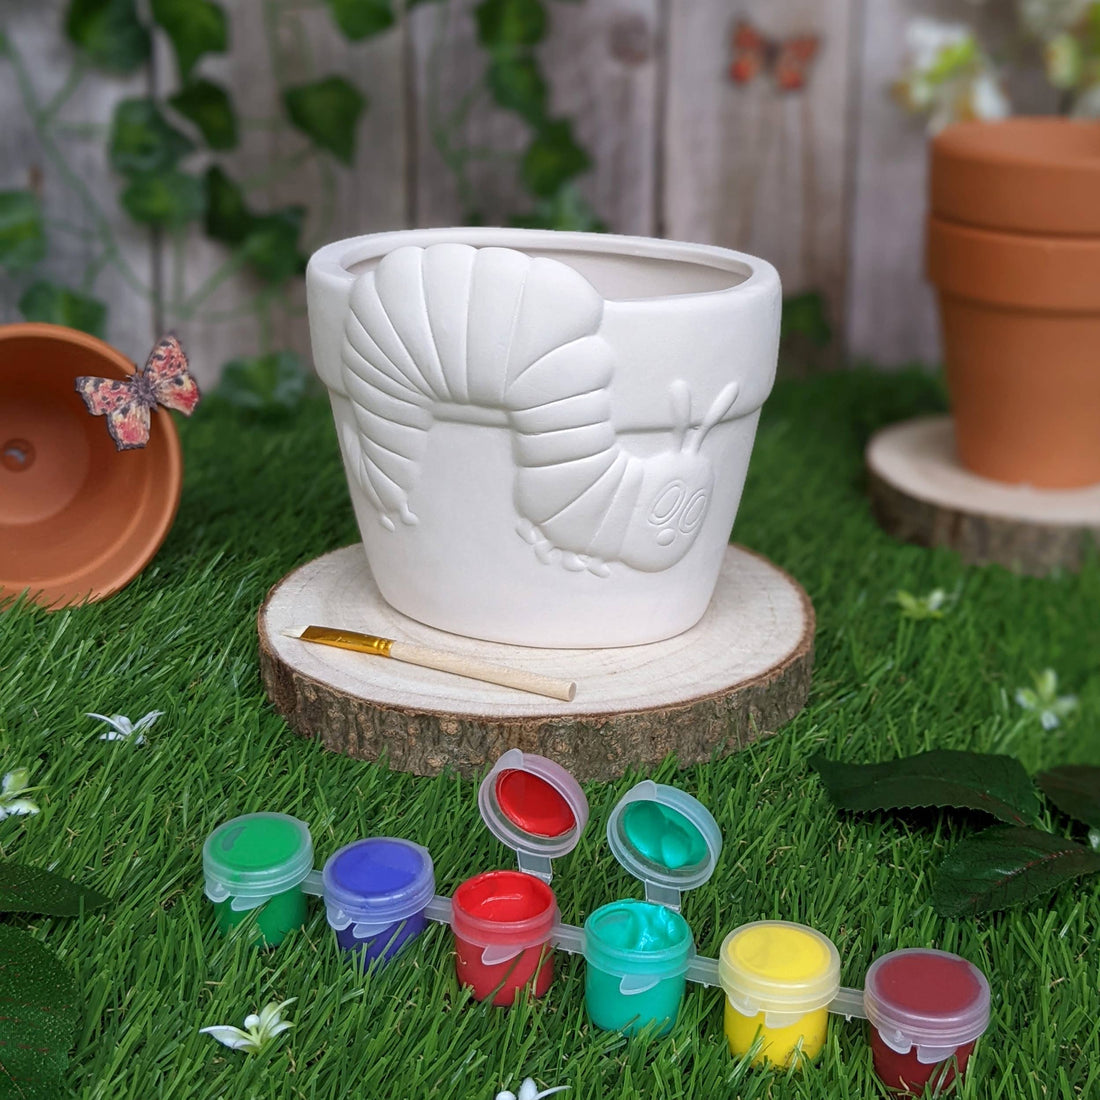 Paint Your Own Plant Pot - The Very Hungry Caterpillar